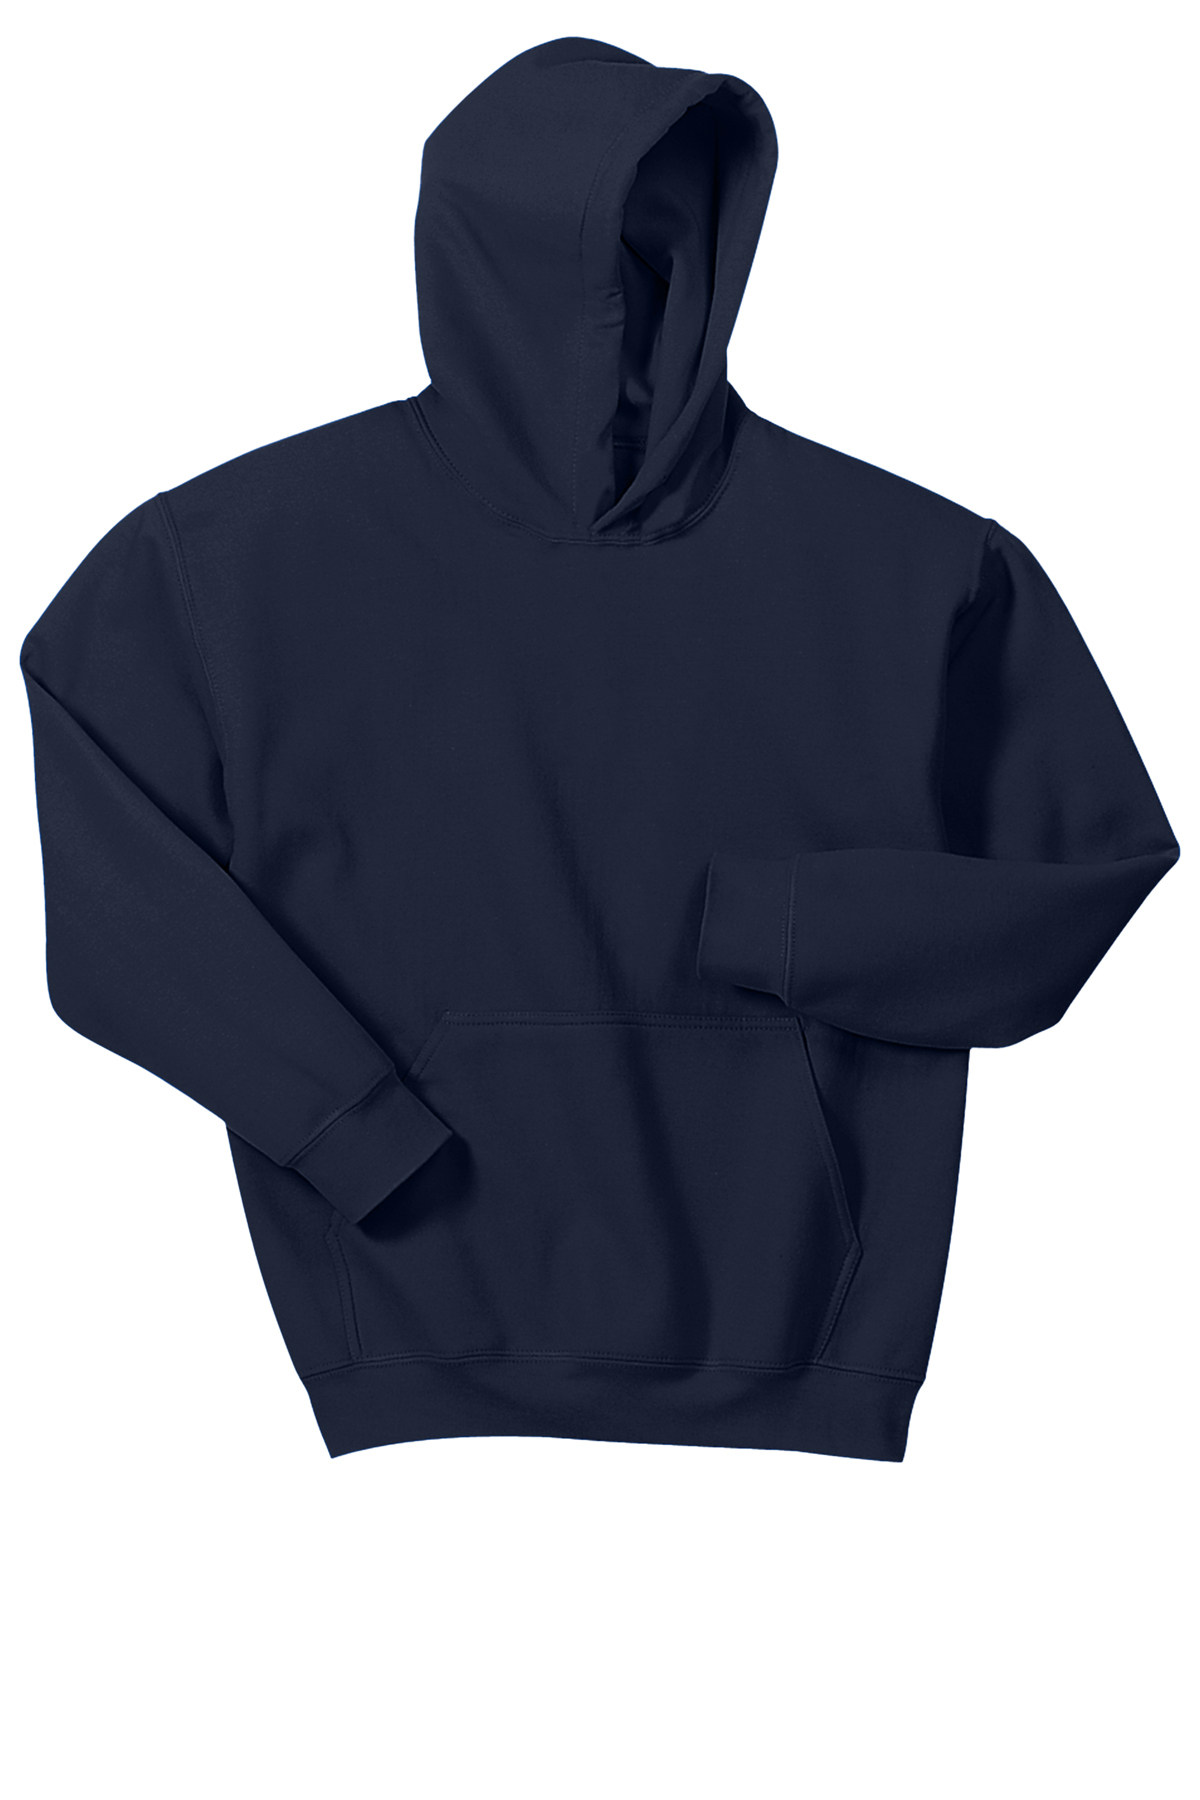 HC - Hooded Navy color sweat shirt with Logo.